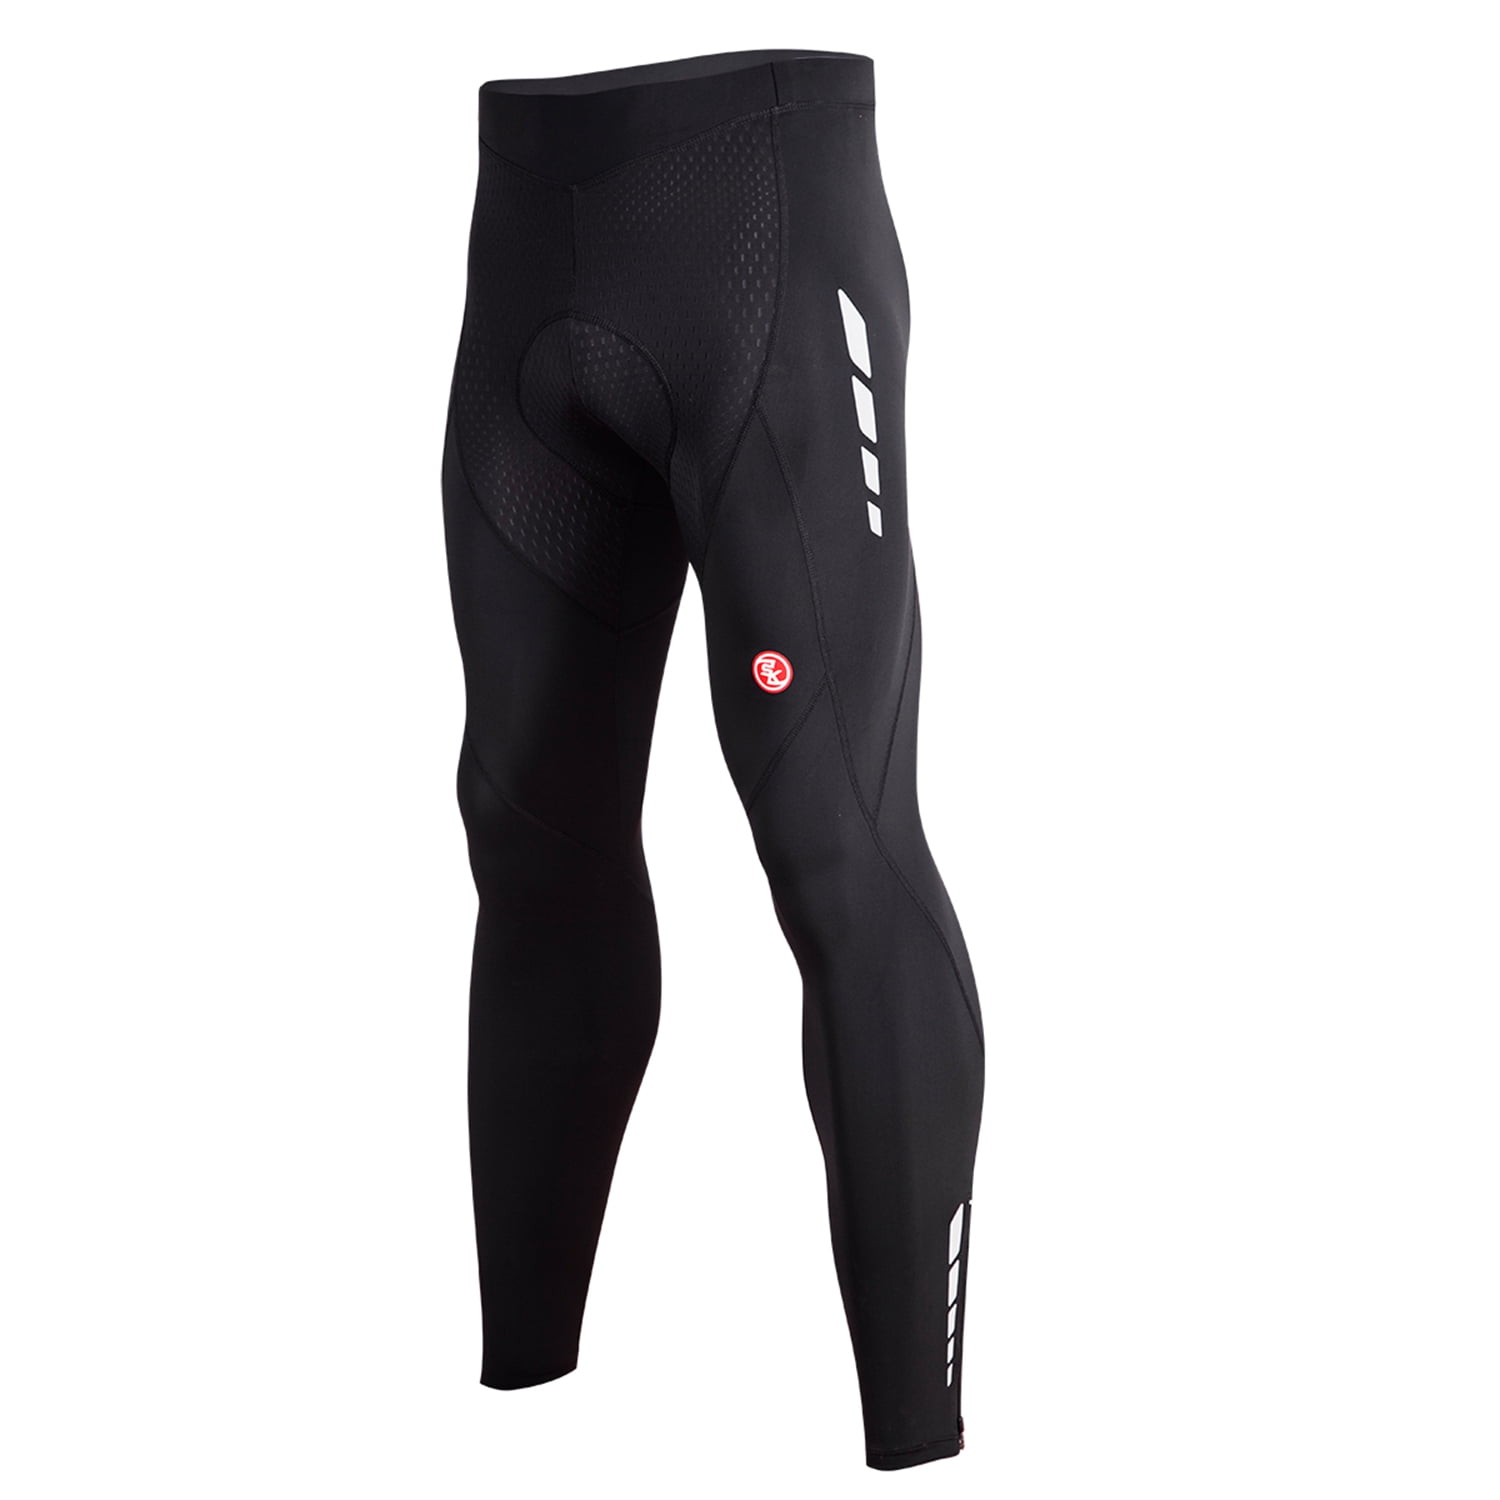 Canari Cyclewear Men's Veloce Pro Cycle Tights 